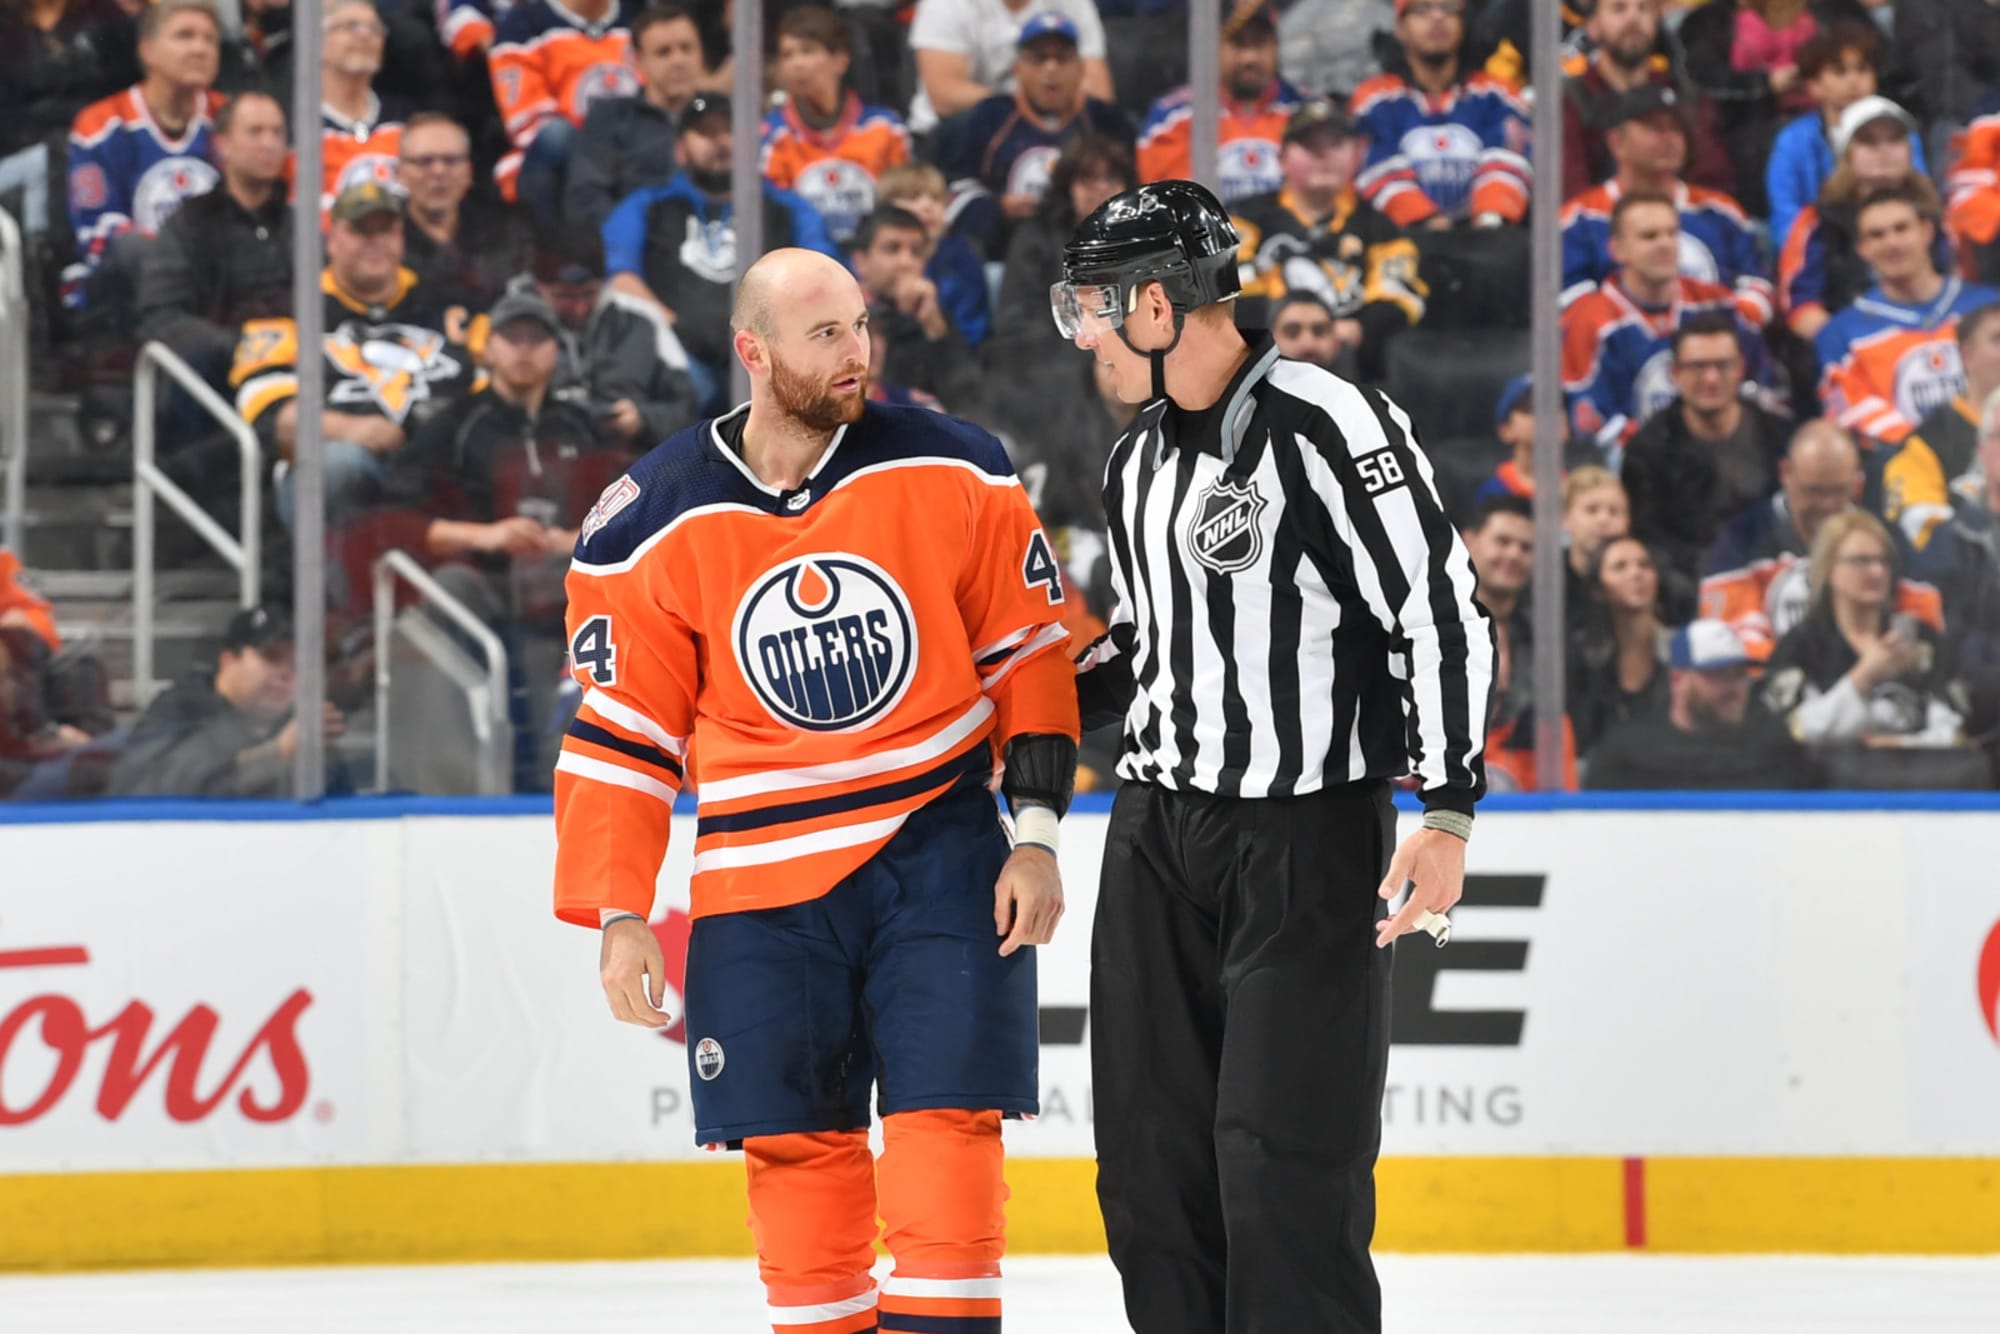 The Edmonton Oilers' Zack Kassian (44) fights with the Florida